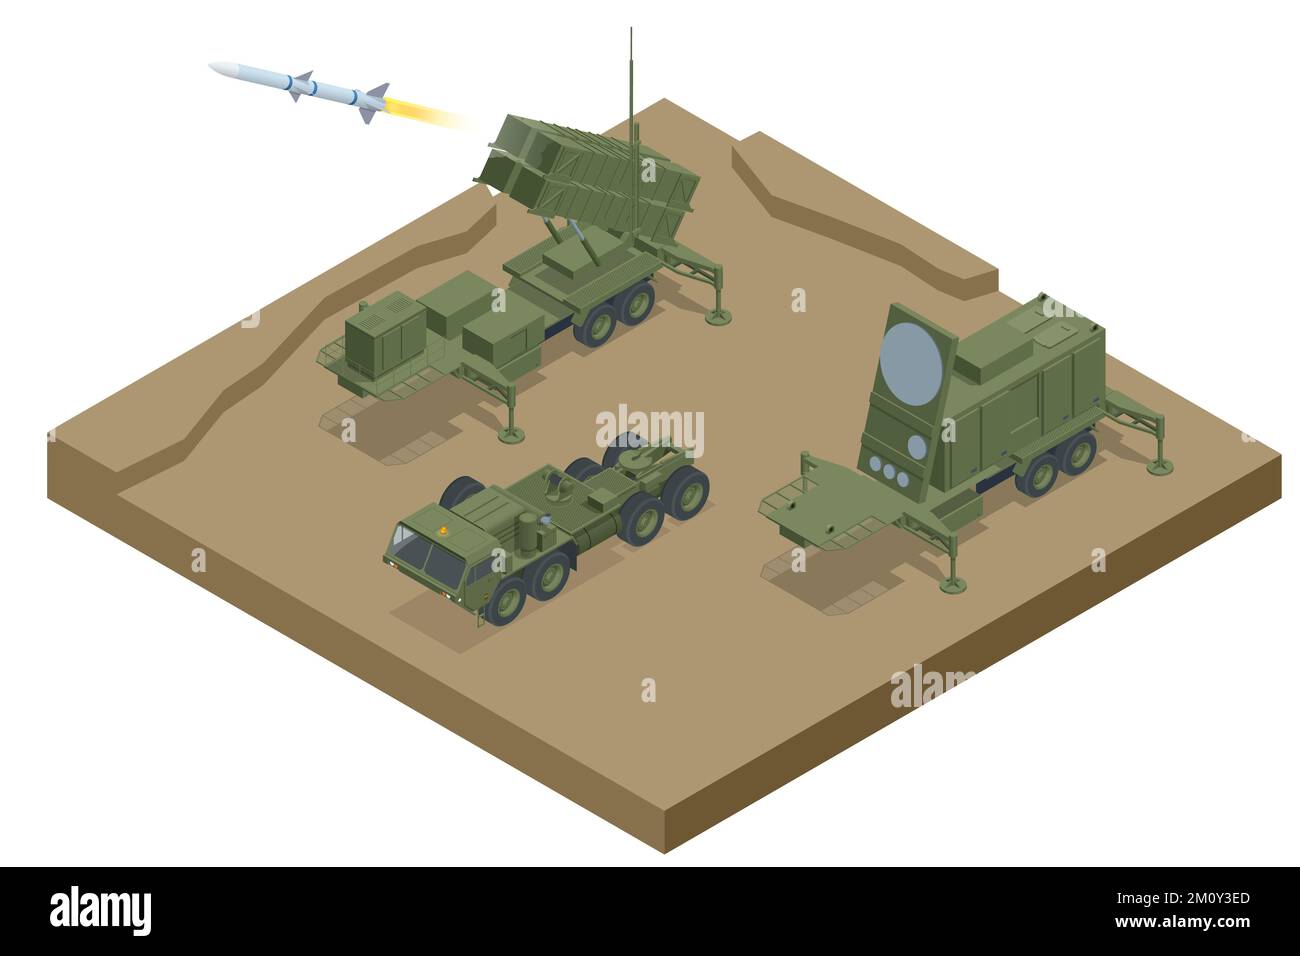 Isometric Mobile surface-to-air missile or anti-ballistic missile system MIM-104 Patriot. American surface-to-air missile system developed by Raytheon Stock Vector